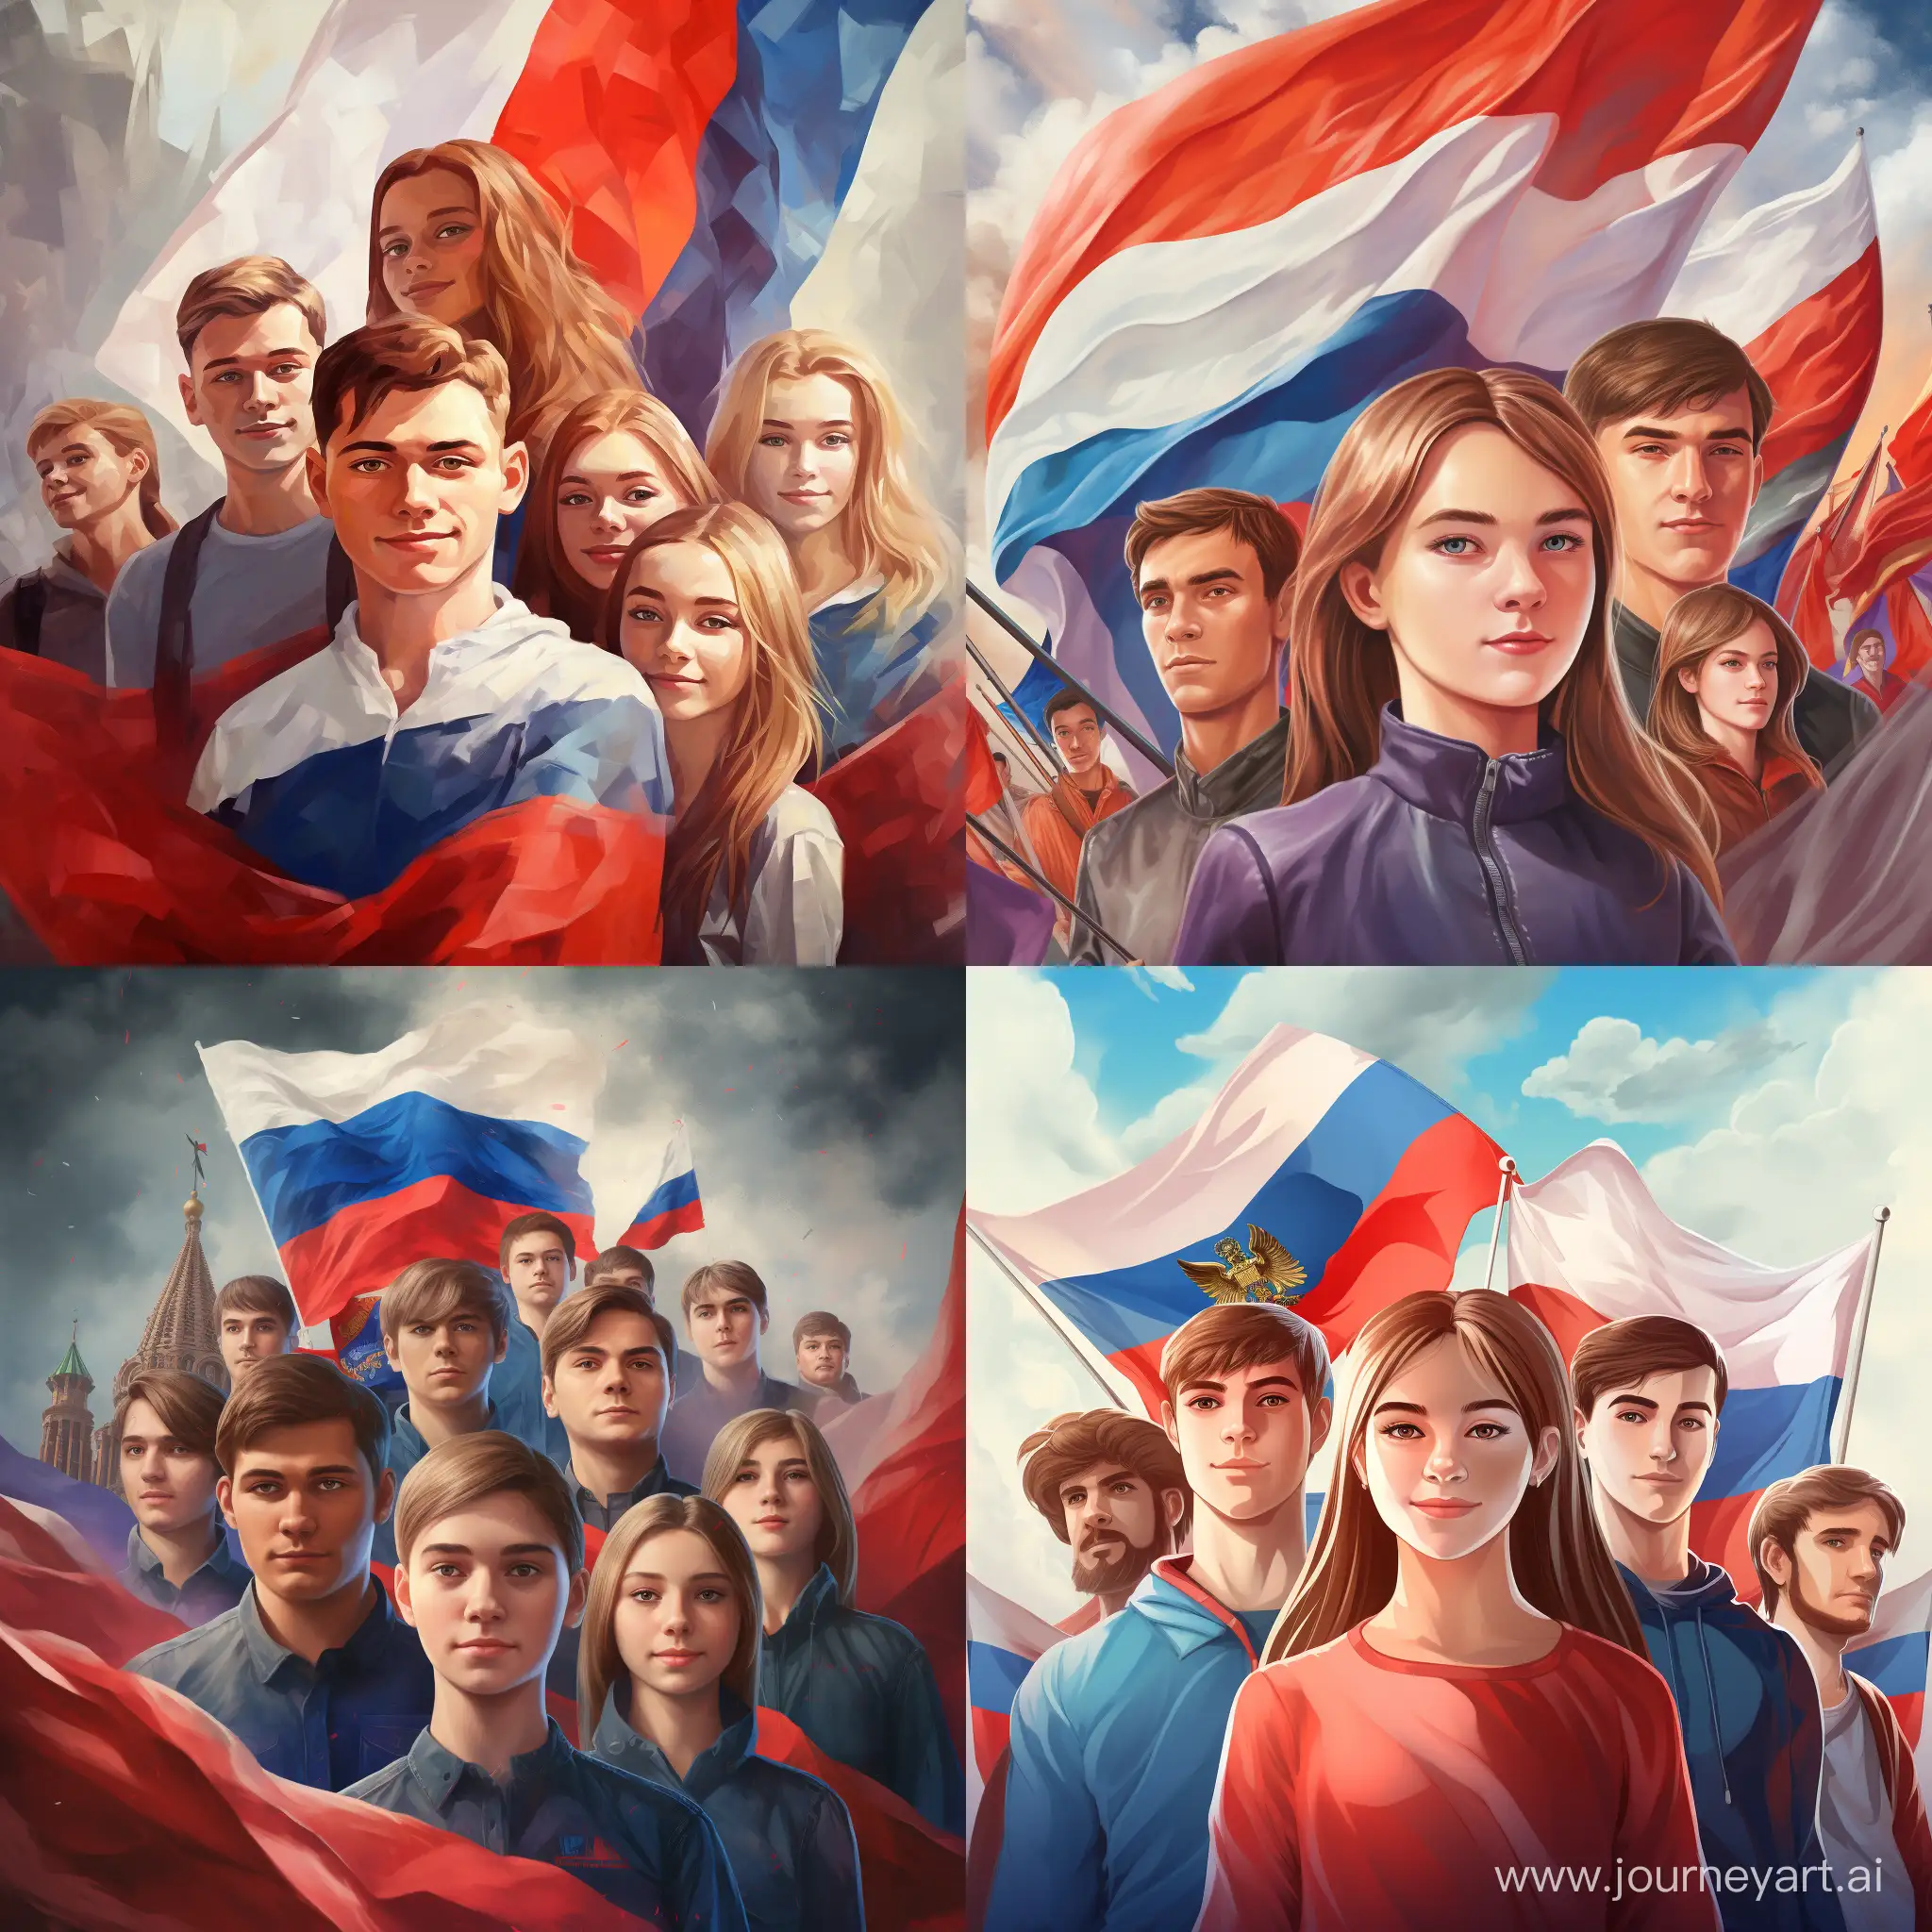 Patriotic-Youth-Gathering-Group-Poses-with-Russian-Flag